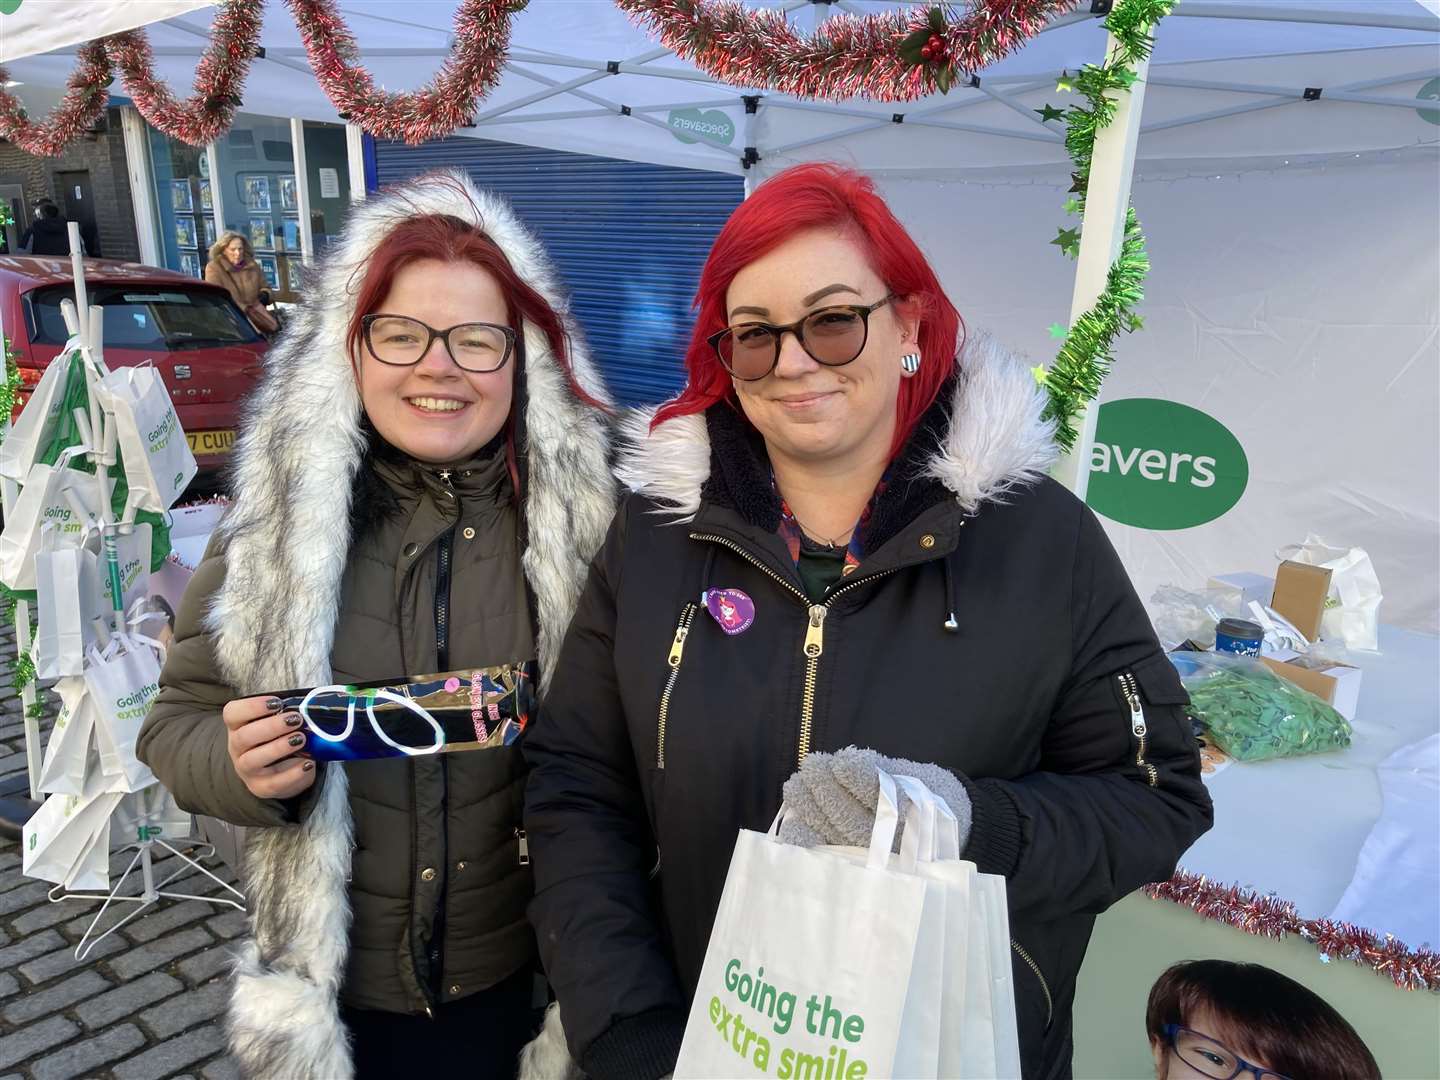 Hannah Kelly, left, and Charlotte Gough from Specsavers' Sheerness store were handing out free glow-in-the-dark glasses to children in the Broadway. The company is sponsoring the Sheerness Town Team which organised the event